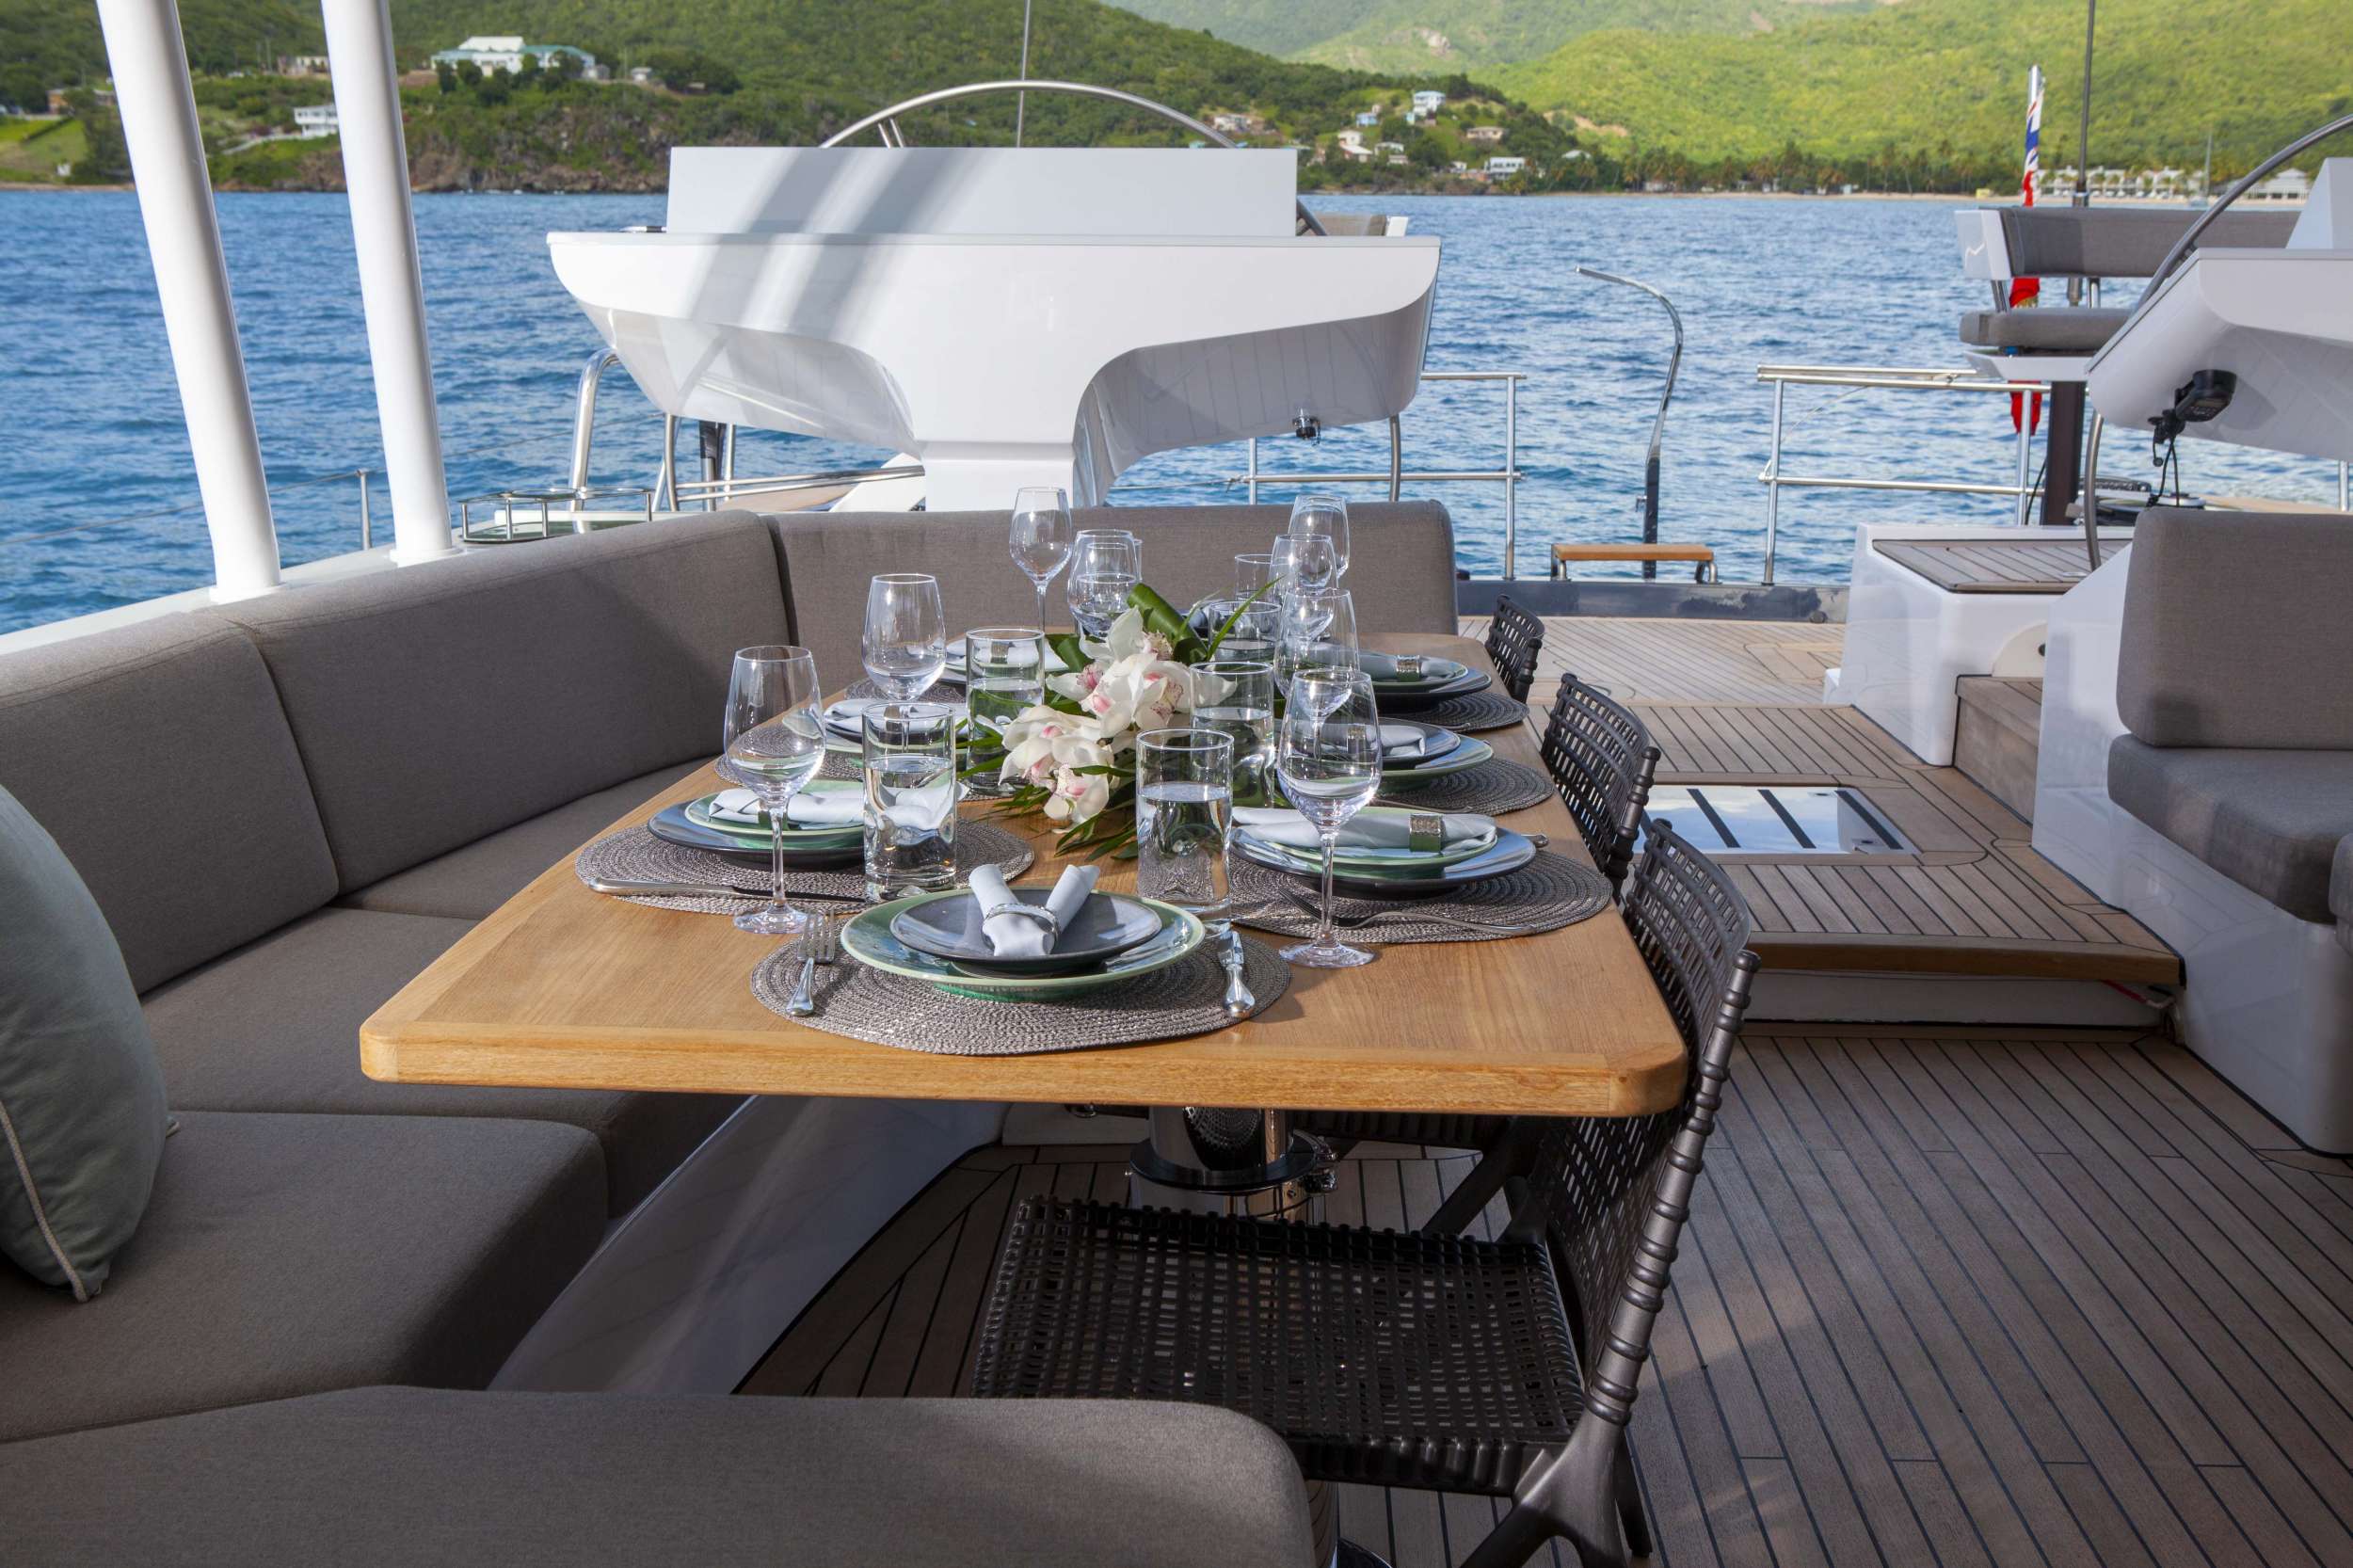 RADIANCE Yacht Charter - 2 deck tables can each seat 8 comfortably &amp; convert to large lounging area when not in use